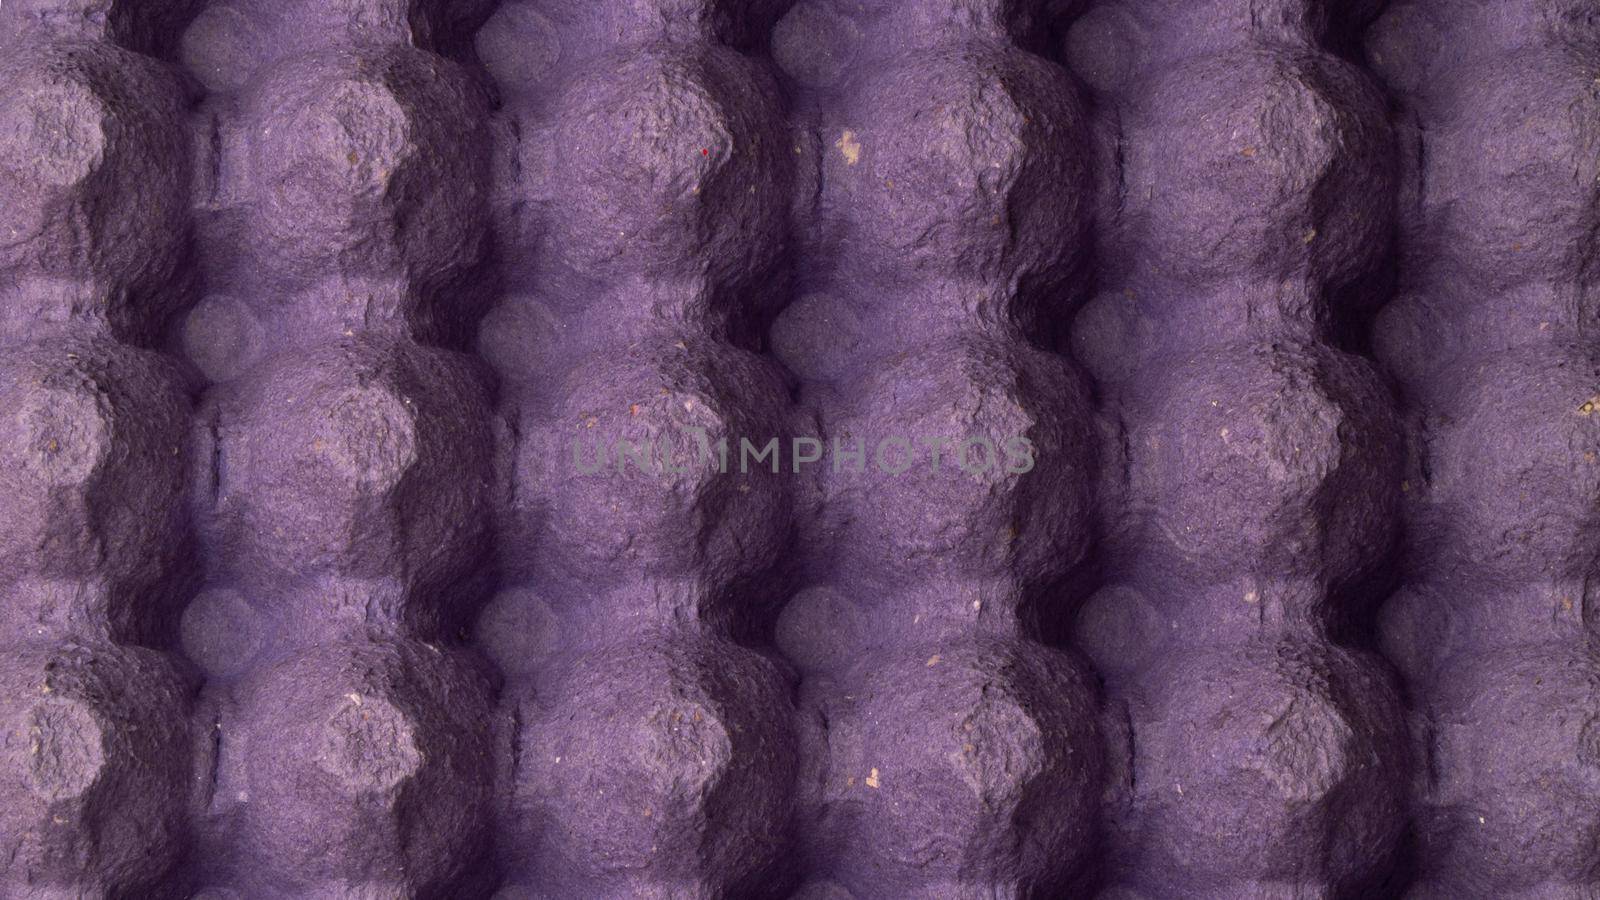 close-up egg lattice rack background three-dimensional pattern with bulges purple